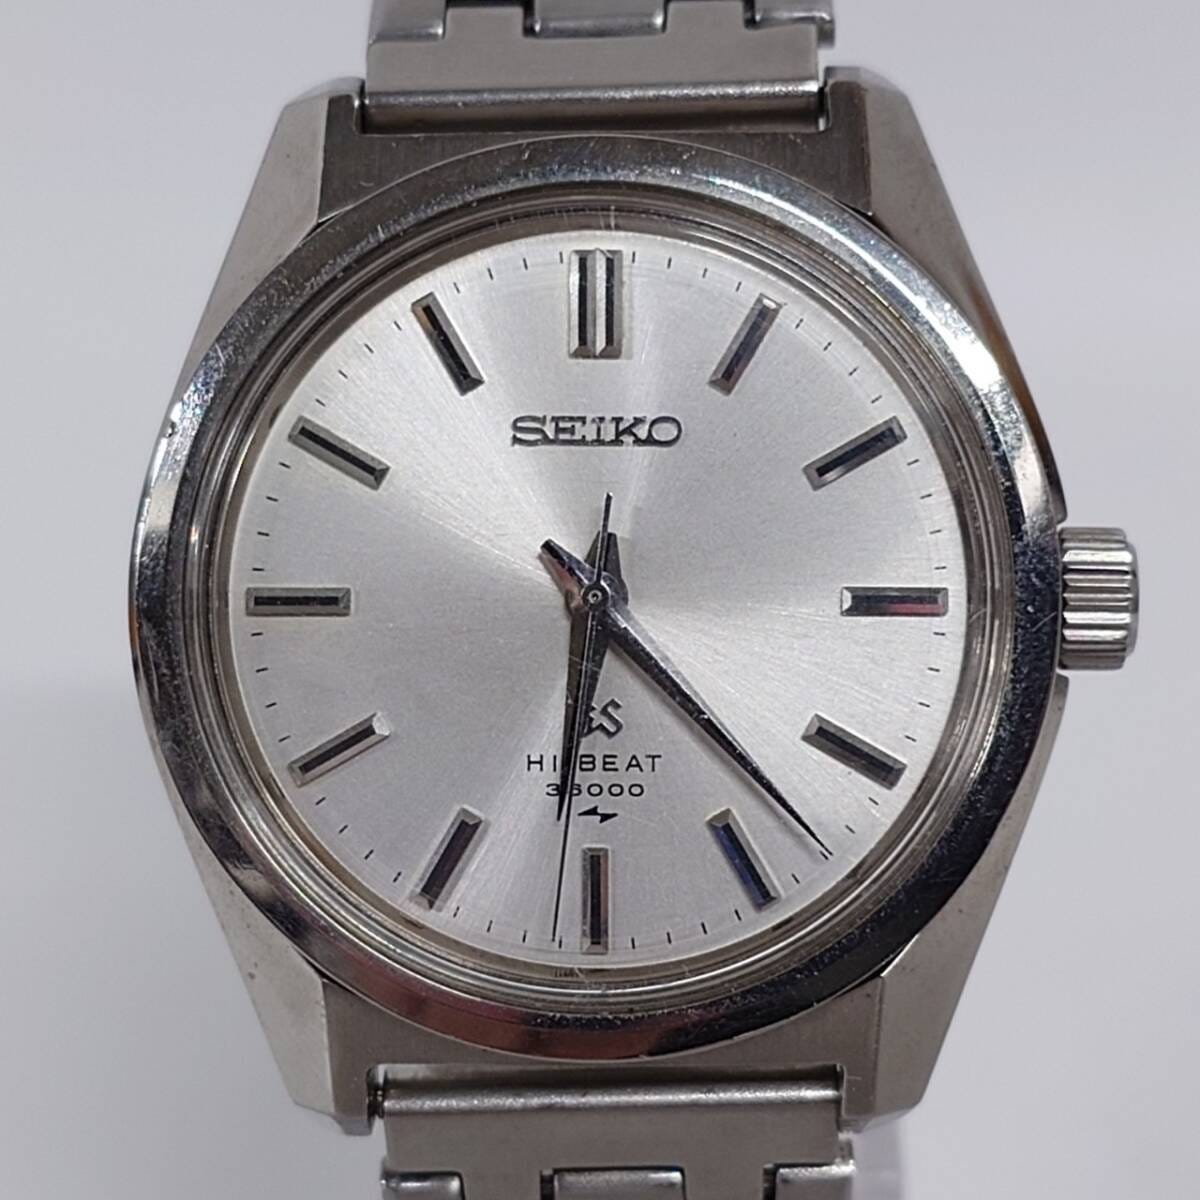 You're going to need a bigger boat - the Grand Seiko guy